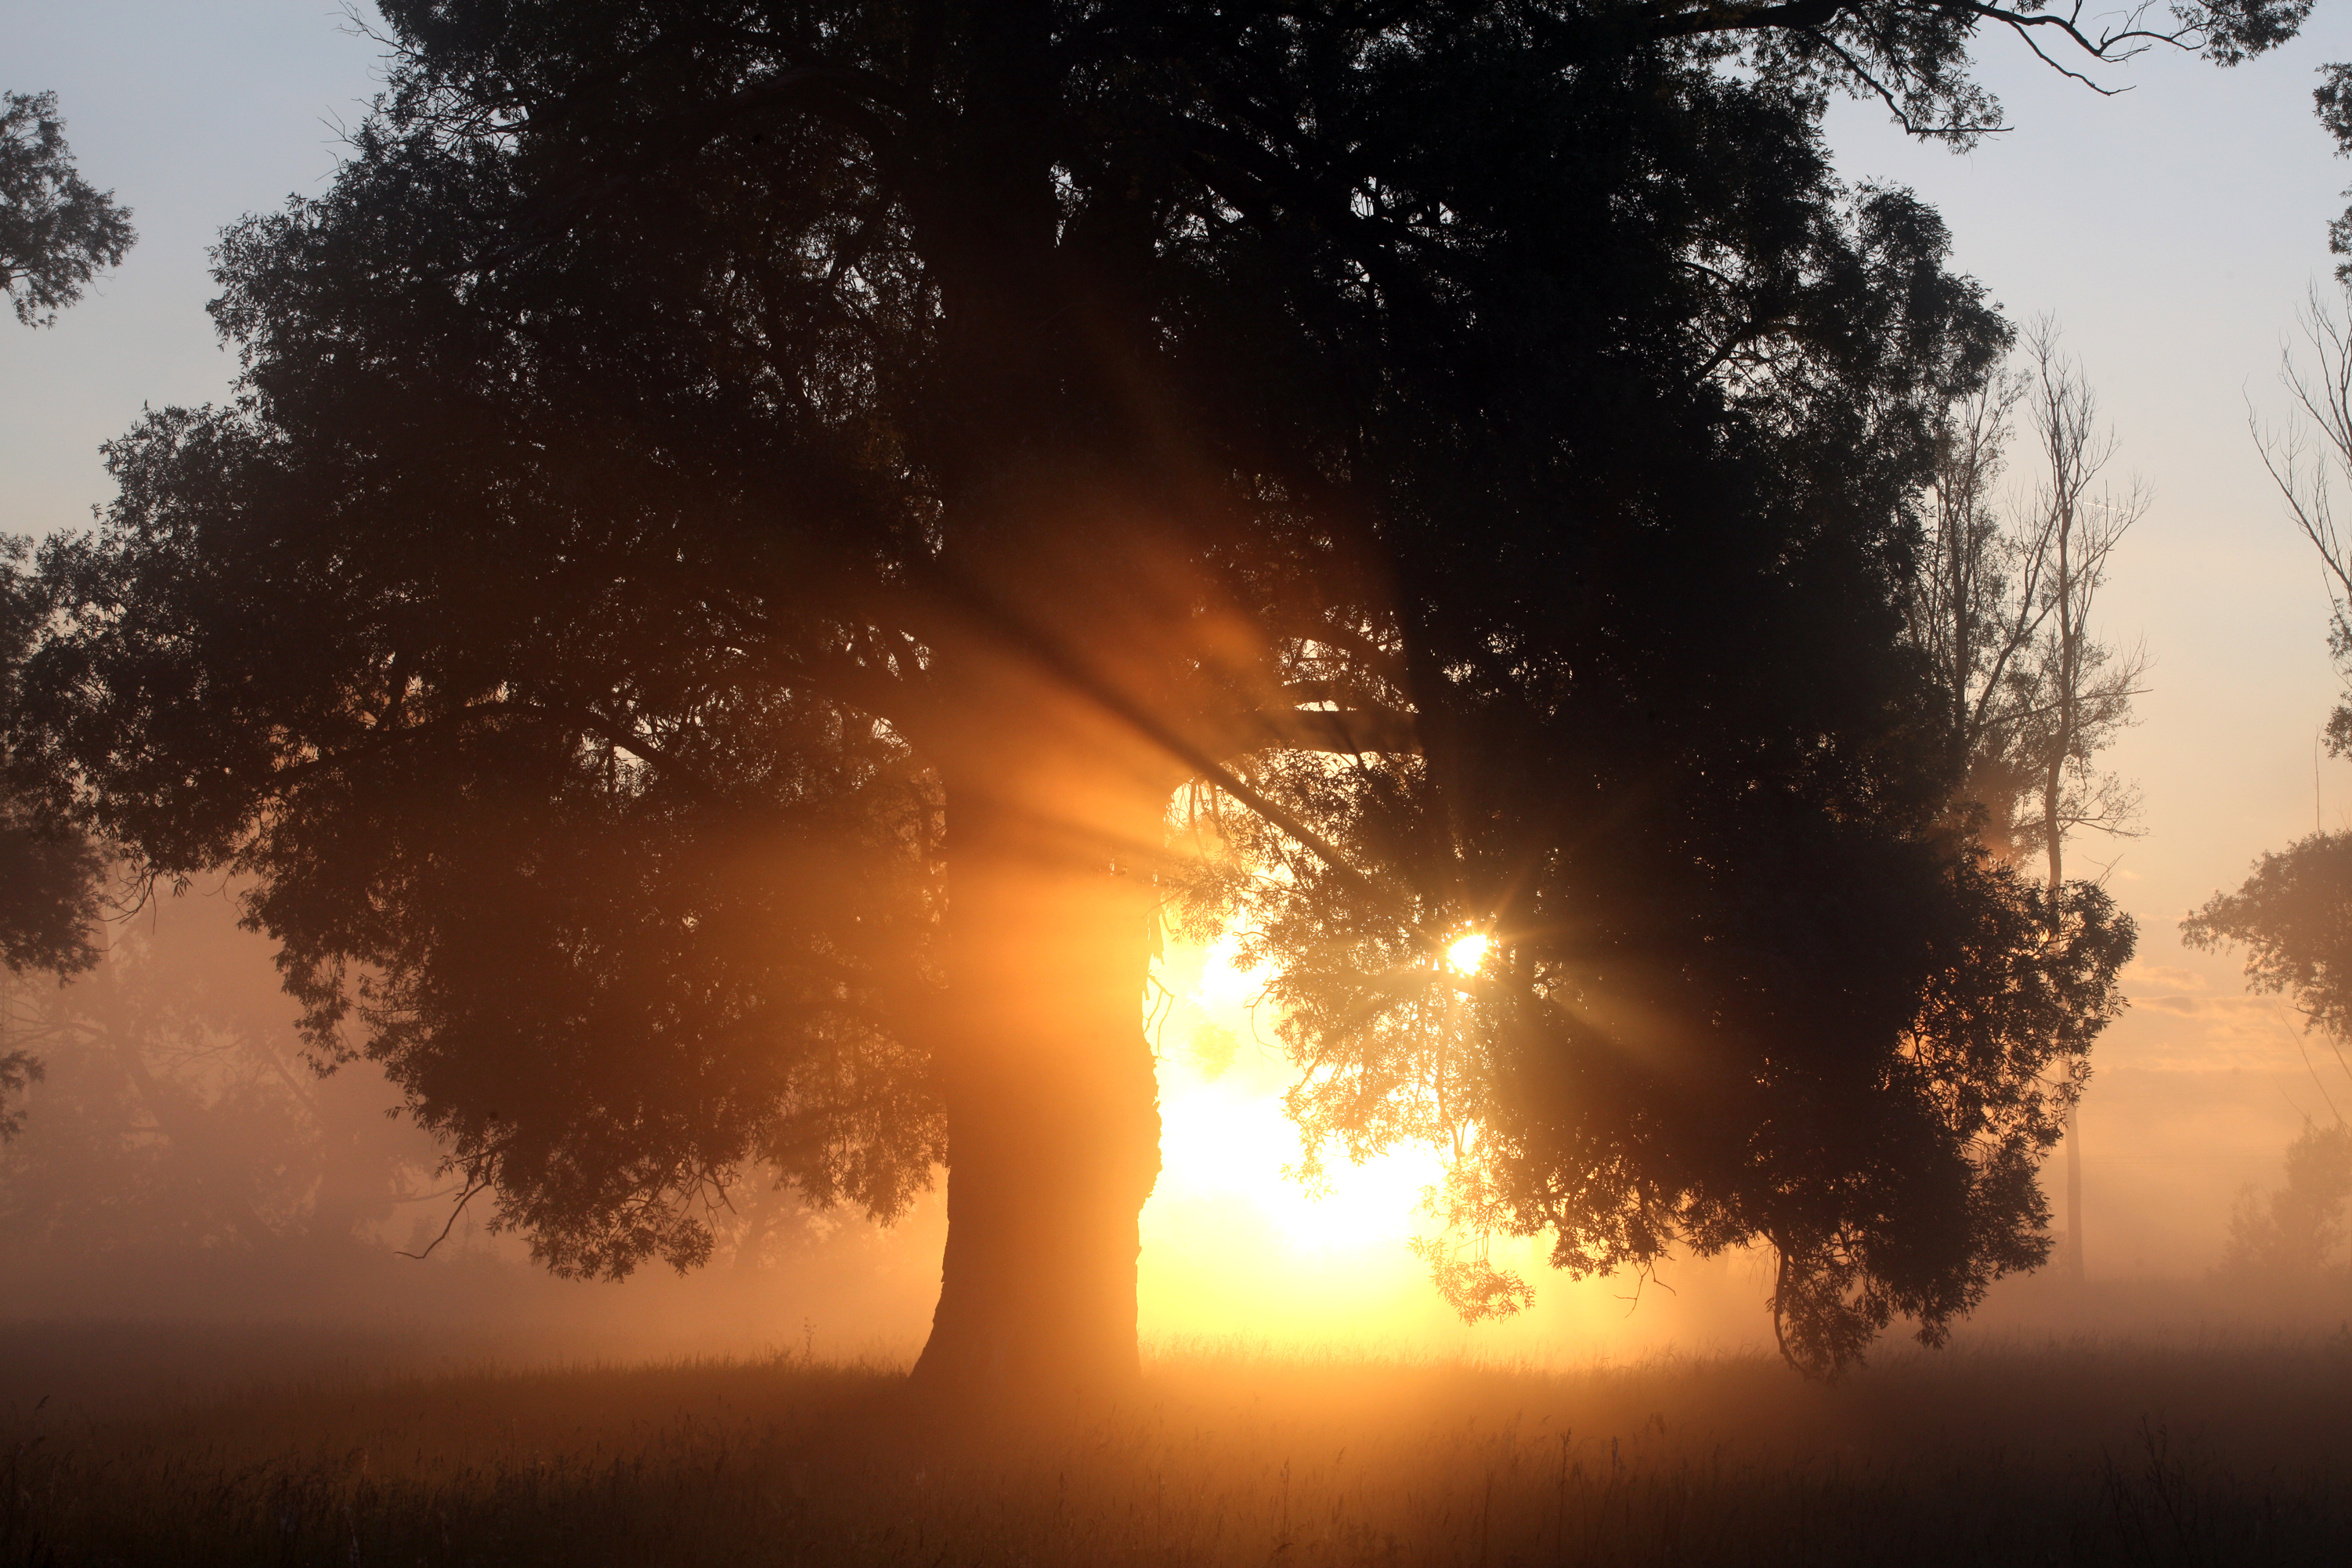 picturesque summer landscape misty dawn in an oak grove on the banks of the river